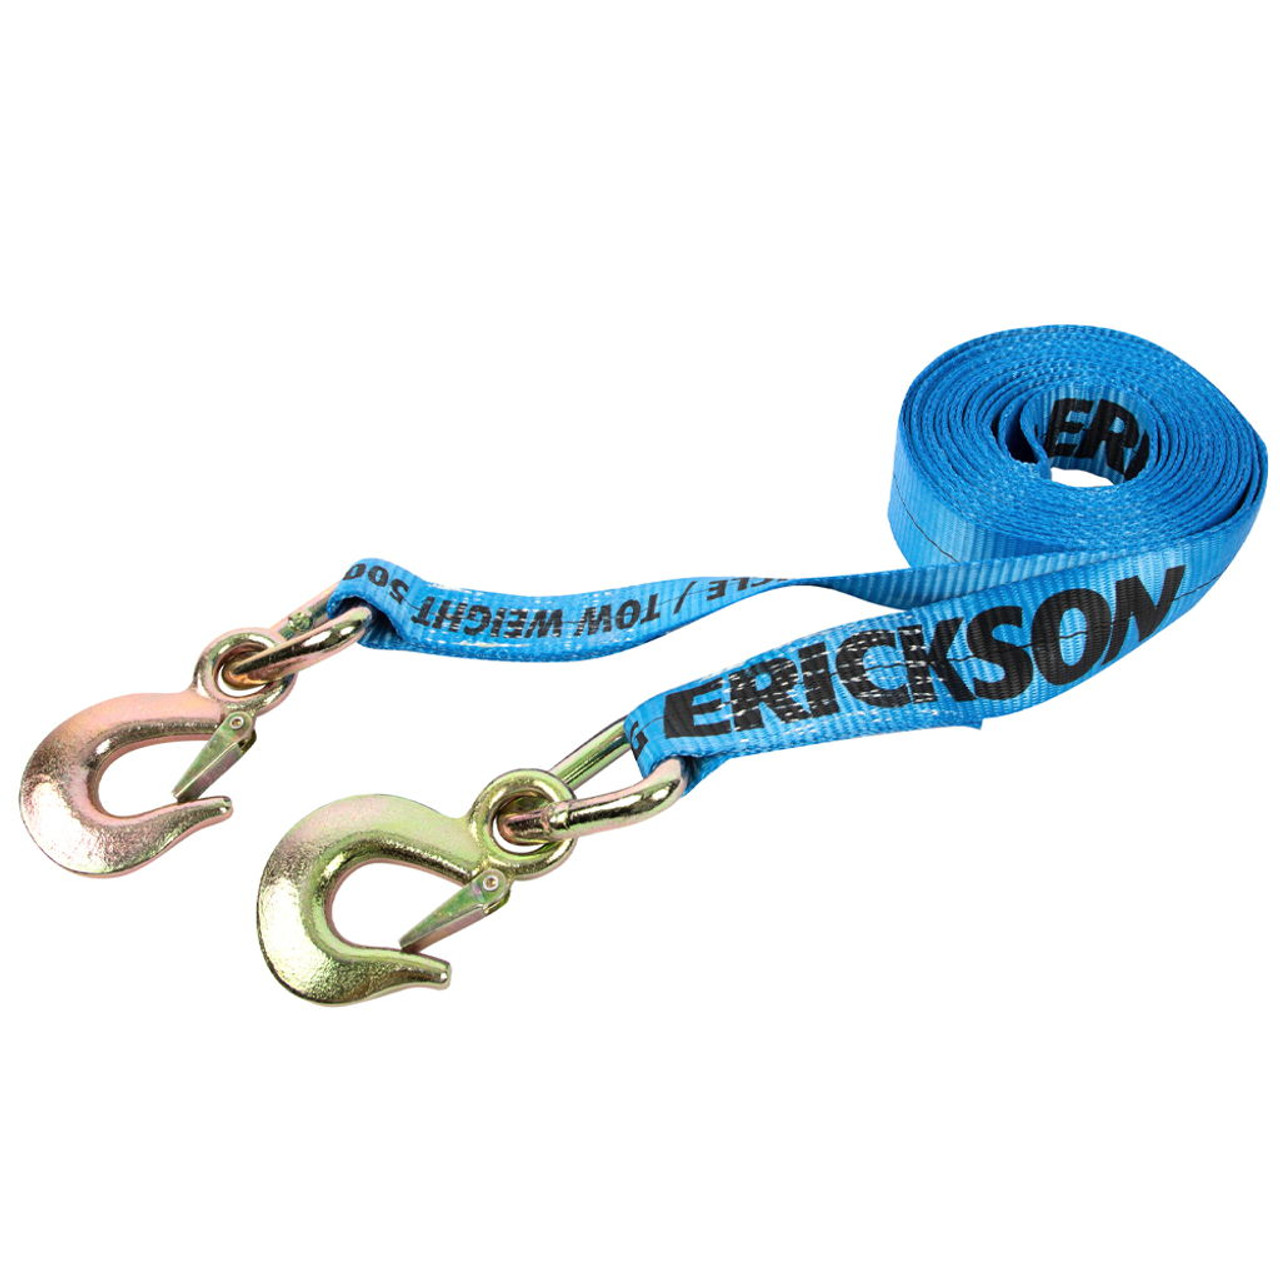 Erickson 2 X 20' Tow Strap with Forged Safety Snap Hook